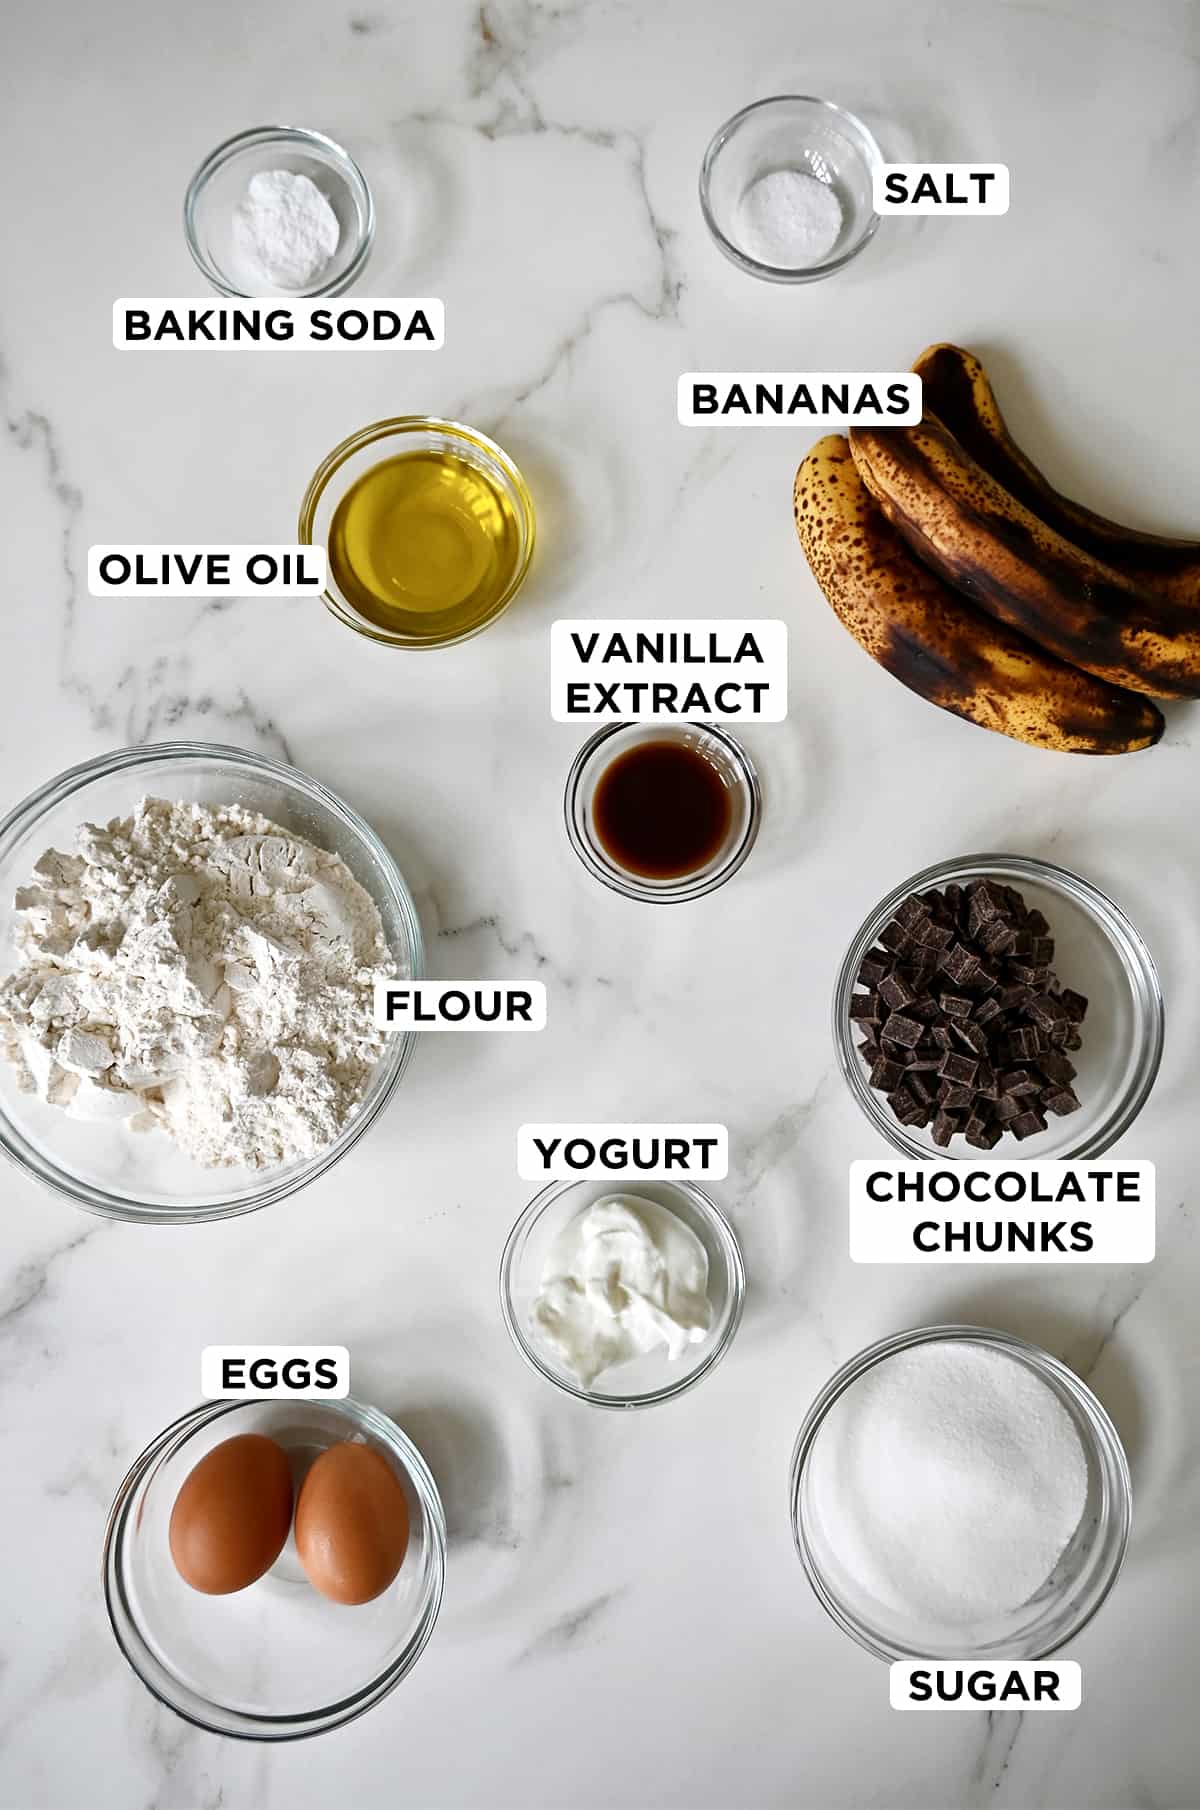 All of the ingredients needed to make one-bowl banana bread, including baking soda, overripe bananas, olive oil, vanilla extract, chocolate chunks, yogurt, flour, eggs, sugar and salt.